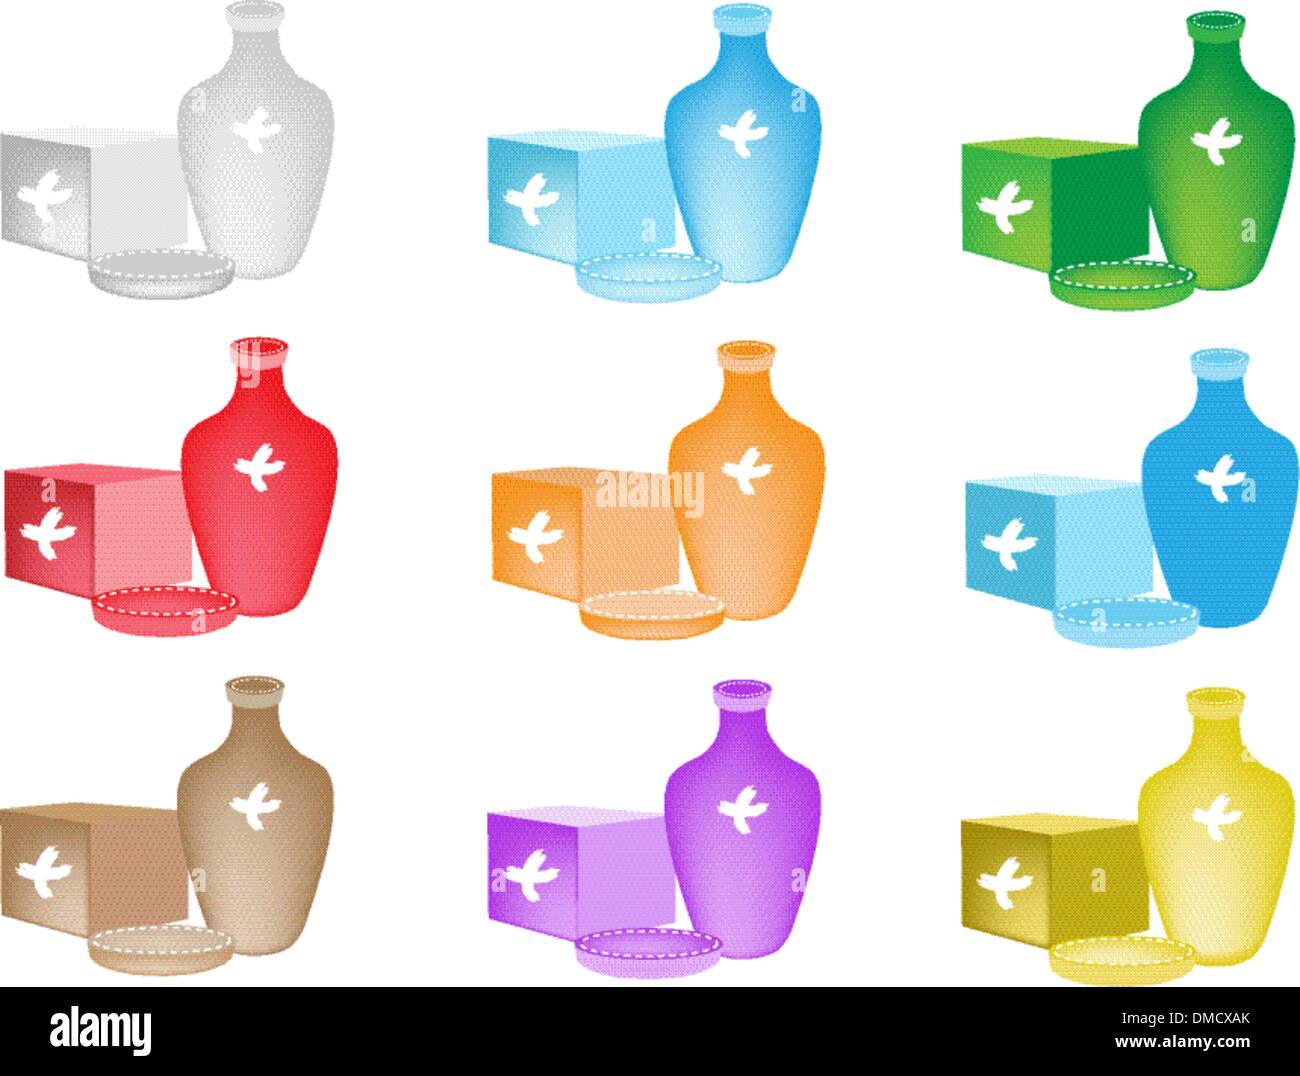 A Colorful Illustration Set of Medical Device Stock Vector